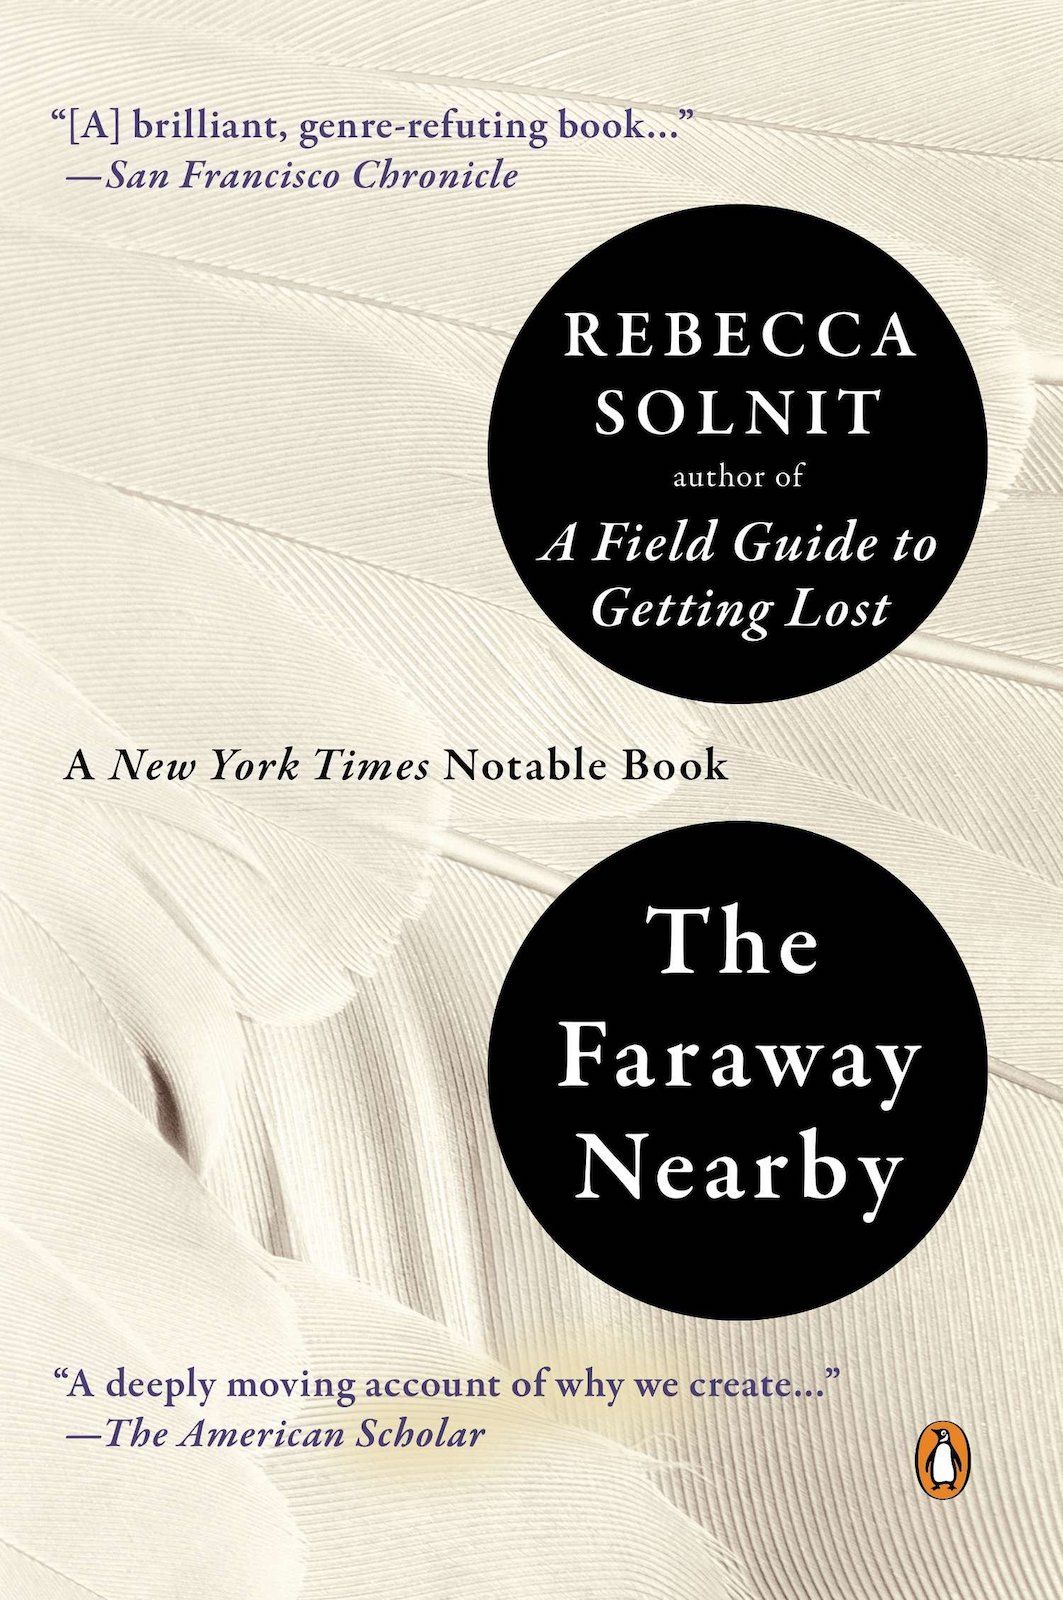 The Faraway Nearby by Rebecca Solnit cover